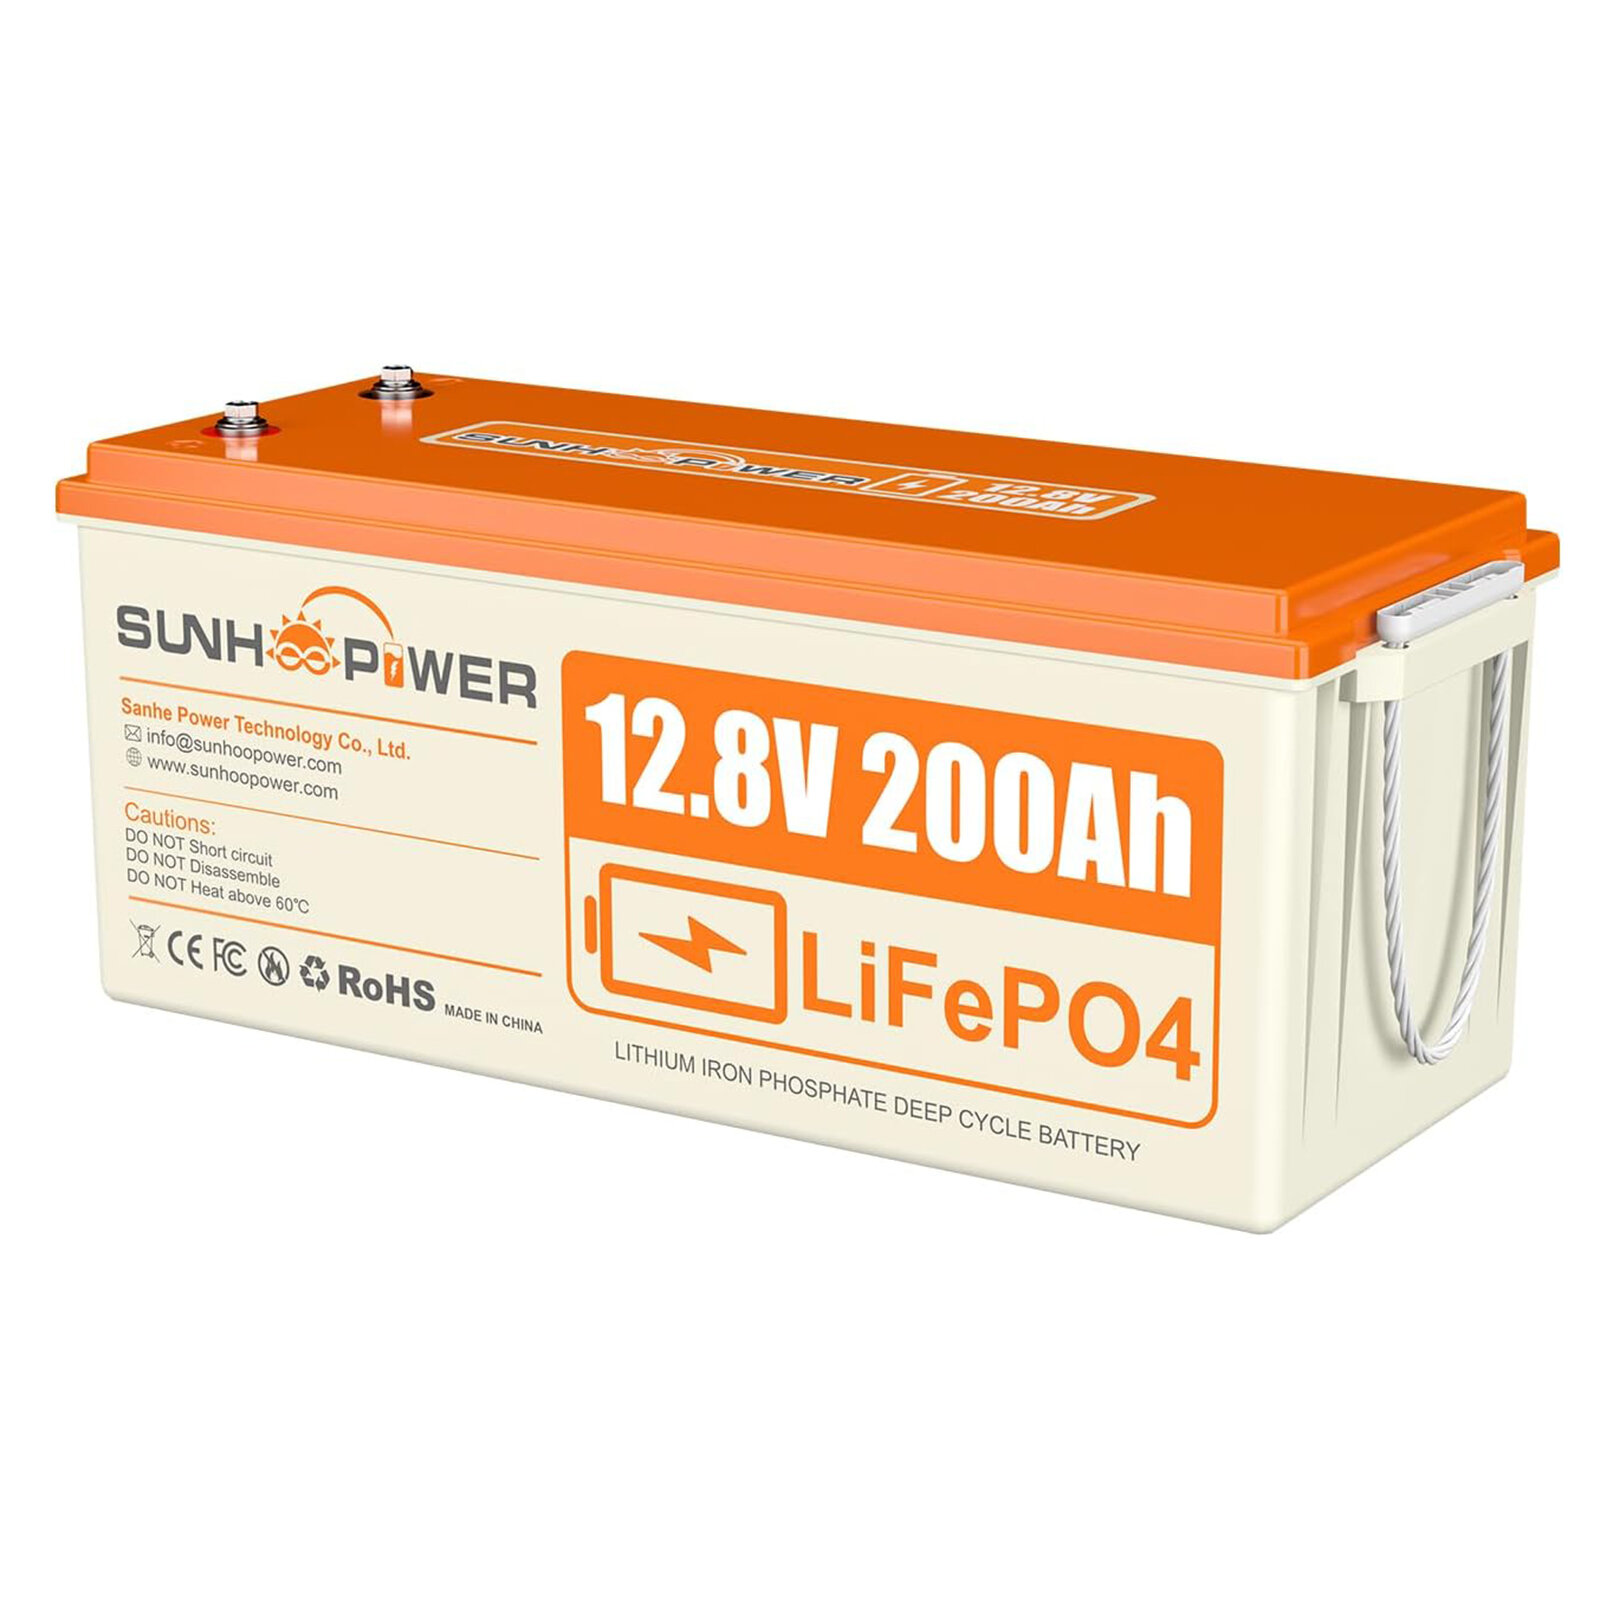 [EU Direct] SUNHOOPOWER 12V 200AH LiFePO4 Battery, 2560Wh Rechargeable Lithium Battery Built-in 100A BMS, Self-Discharge, Perfect for RV, Marine, Energy Storage,Off-Grid Backup Power